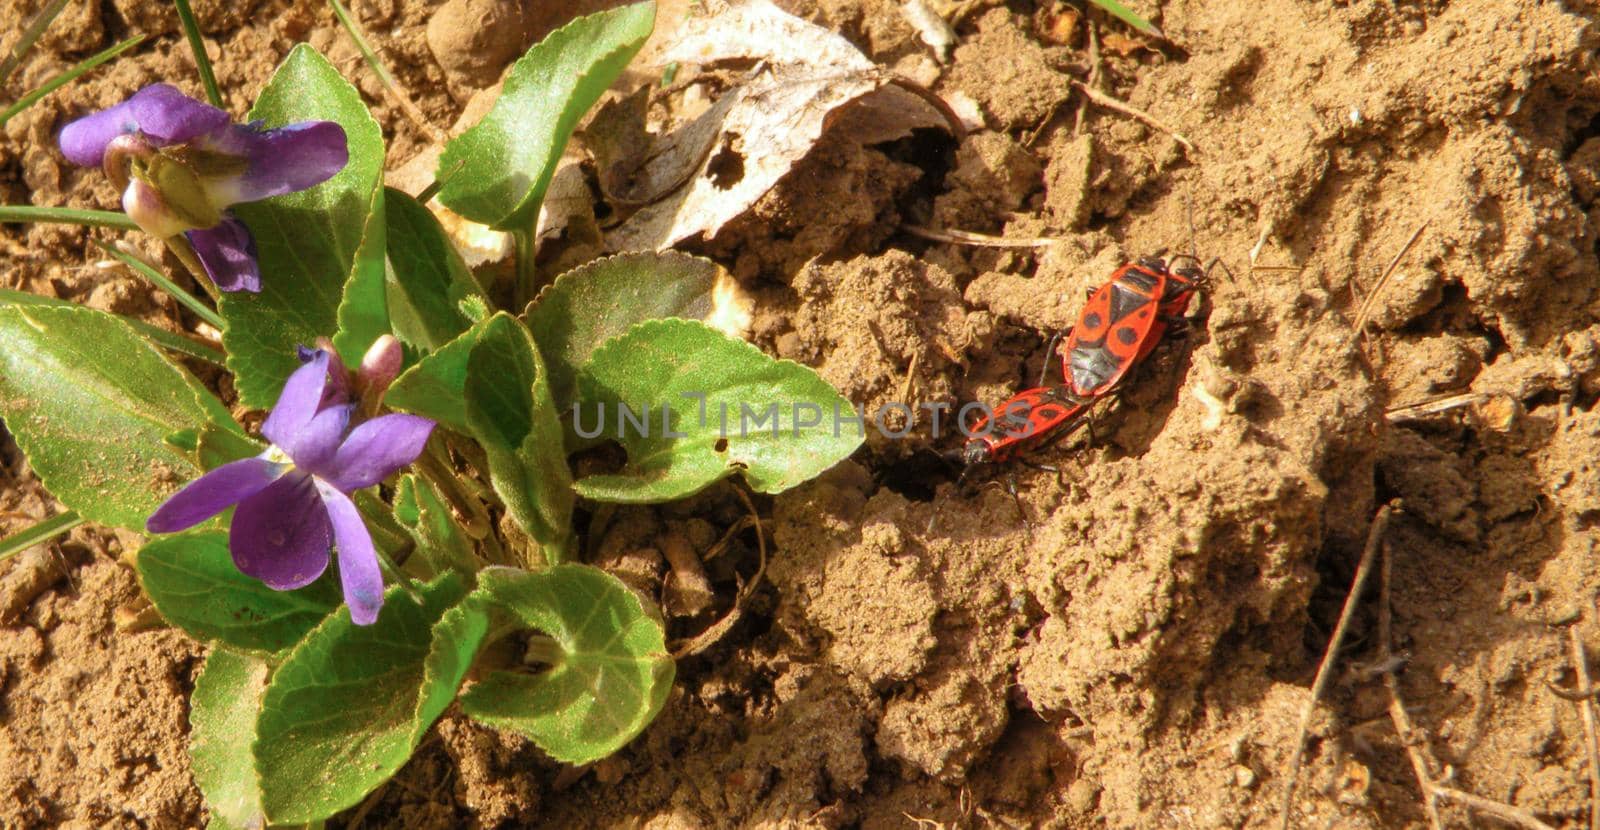 A firebug couple on a dry brown ground with flower. Pyrrhocoris apterus . Soldier bugs by mtx